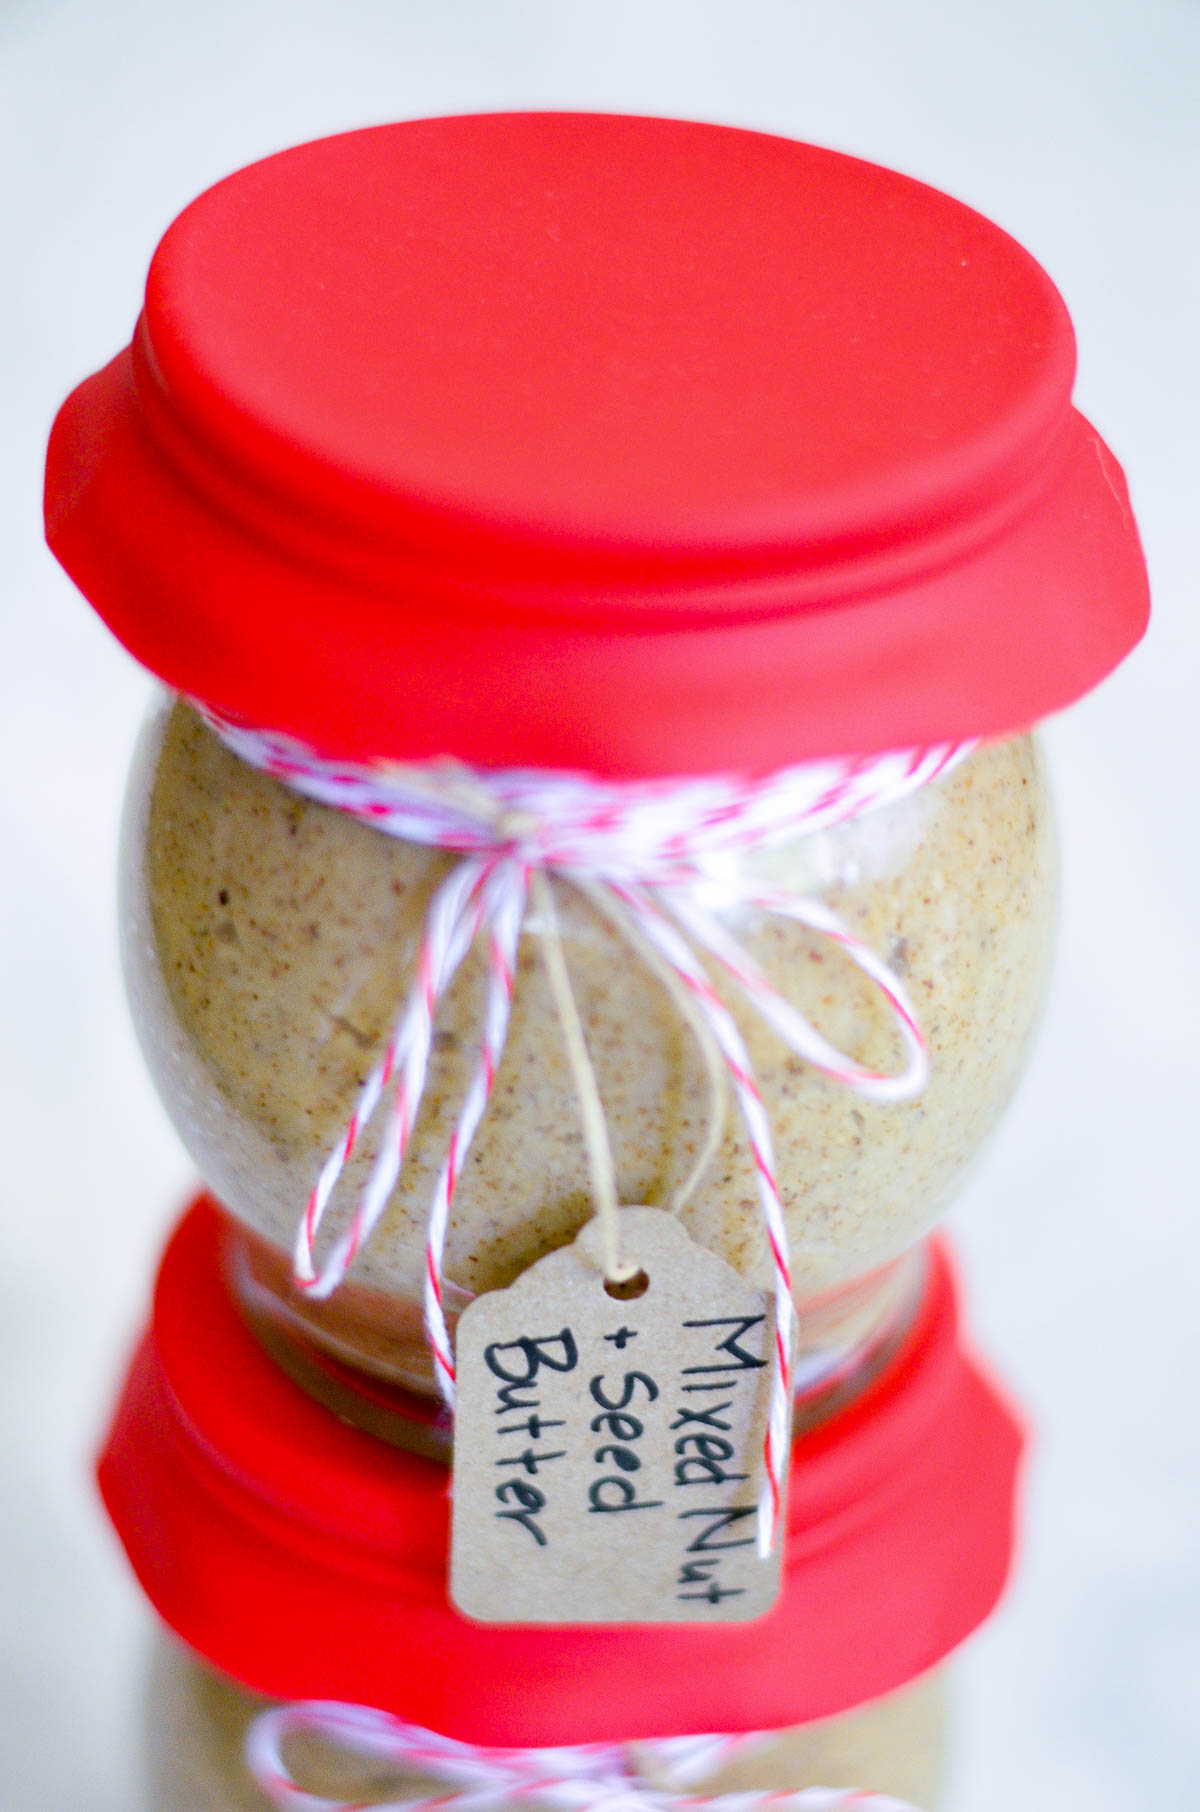 Homemade Nut Butter in Small Gift Jar with Red Lid